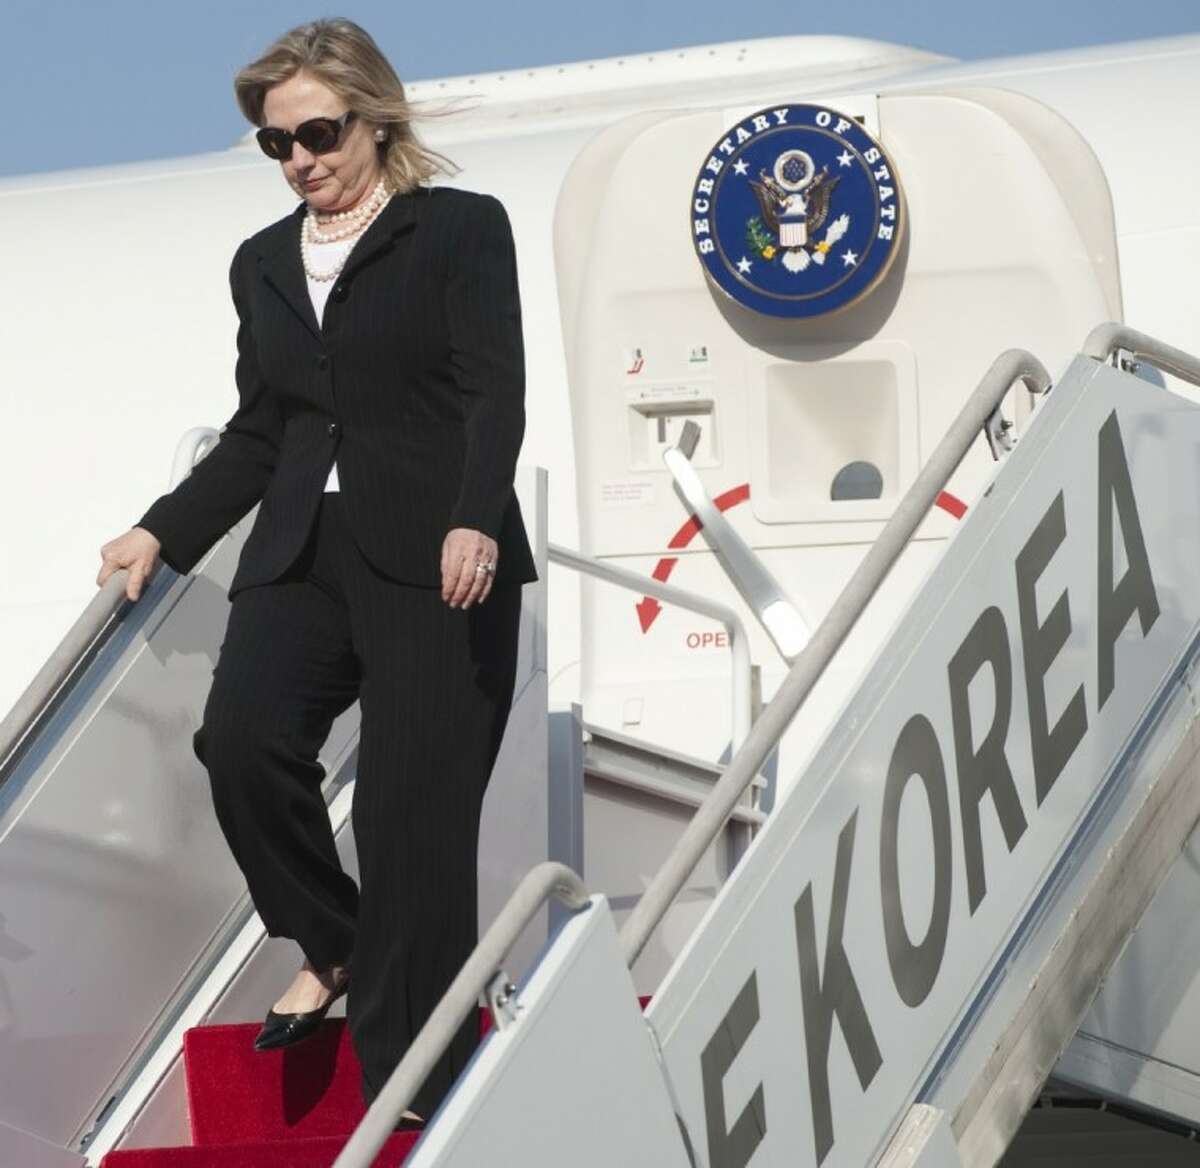 In this April 16, 2011 file photo, U.S. Secretary of State Hillary Rodham Clinton disembarks from a plane upon arrival at Seoul military airport in Seongnam, South Korea. If diplomatic achievements were measured by the number of countries visited, Hillary Rodham Clinton would be the most accomplished secretary of state in history. Since becoming secretary of state in 2009, Clinton has logged 351 days on the road, traveled to 102 countries and flown a whopping 843,839 miles, according to the State Department.